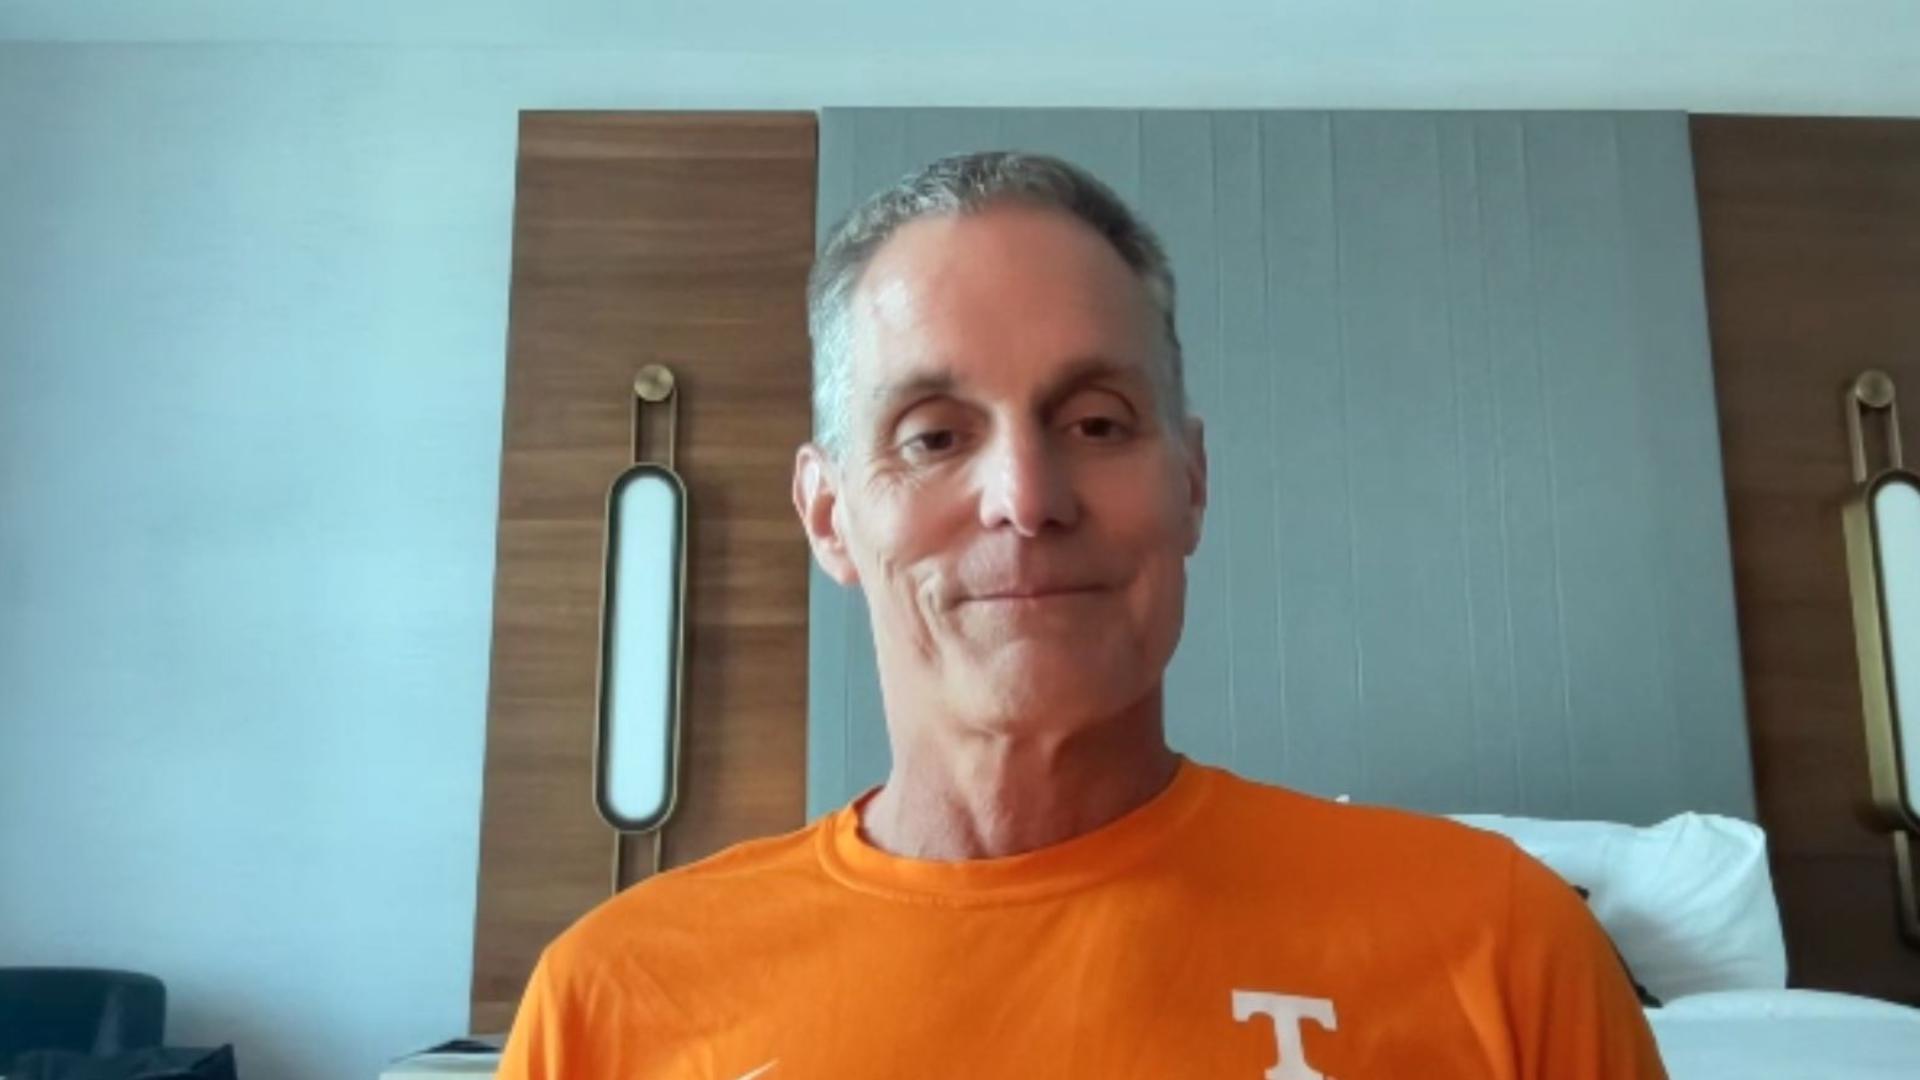 University of Tennessee swim coach discusses how he has never seen his two swimmers compete in a swim-off to earn the last spot in the 100m relay.